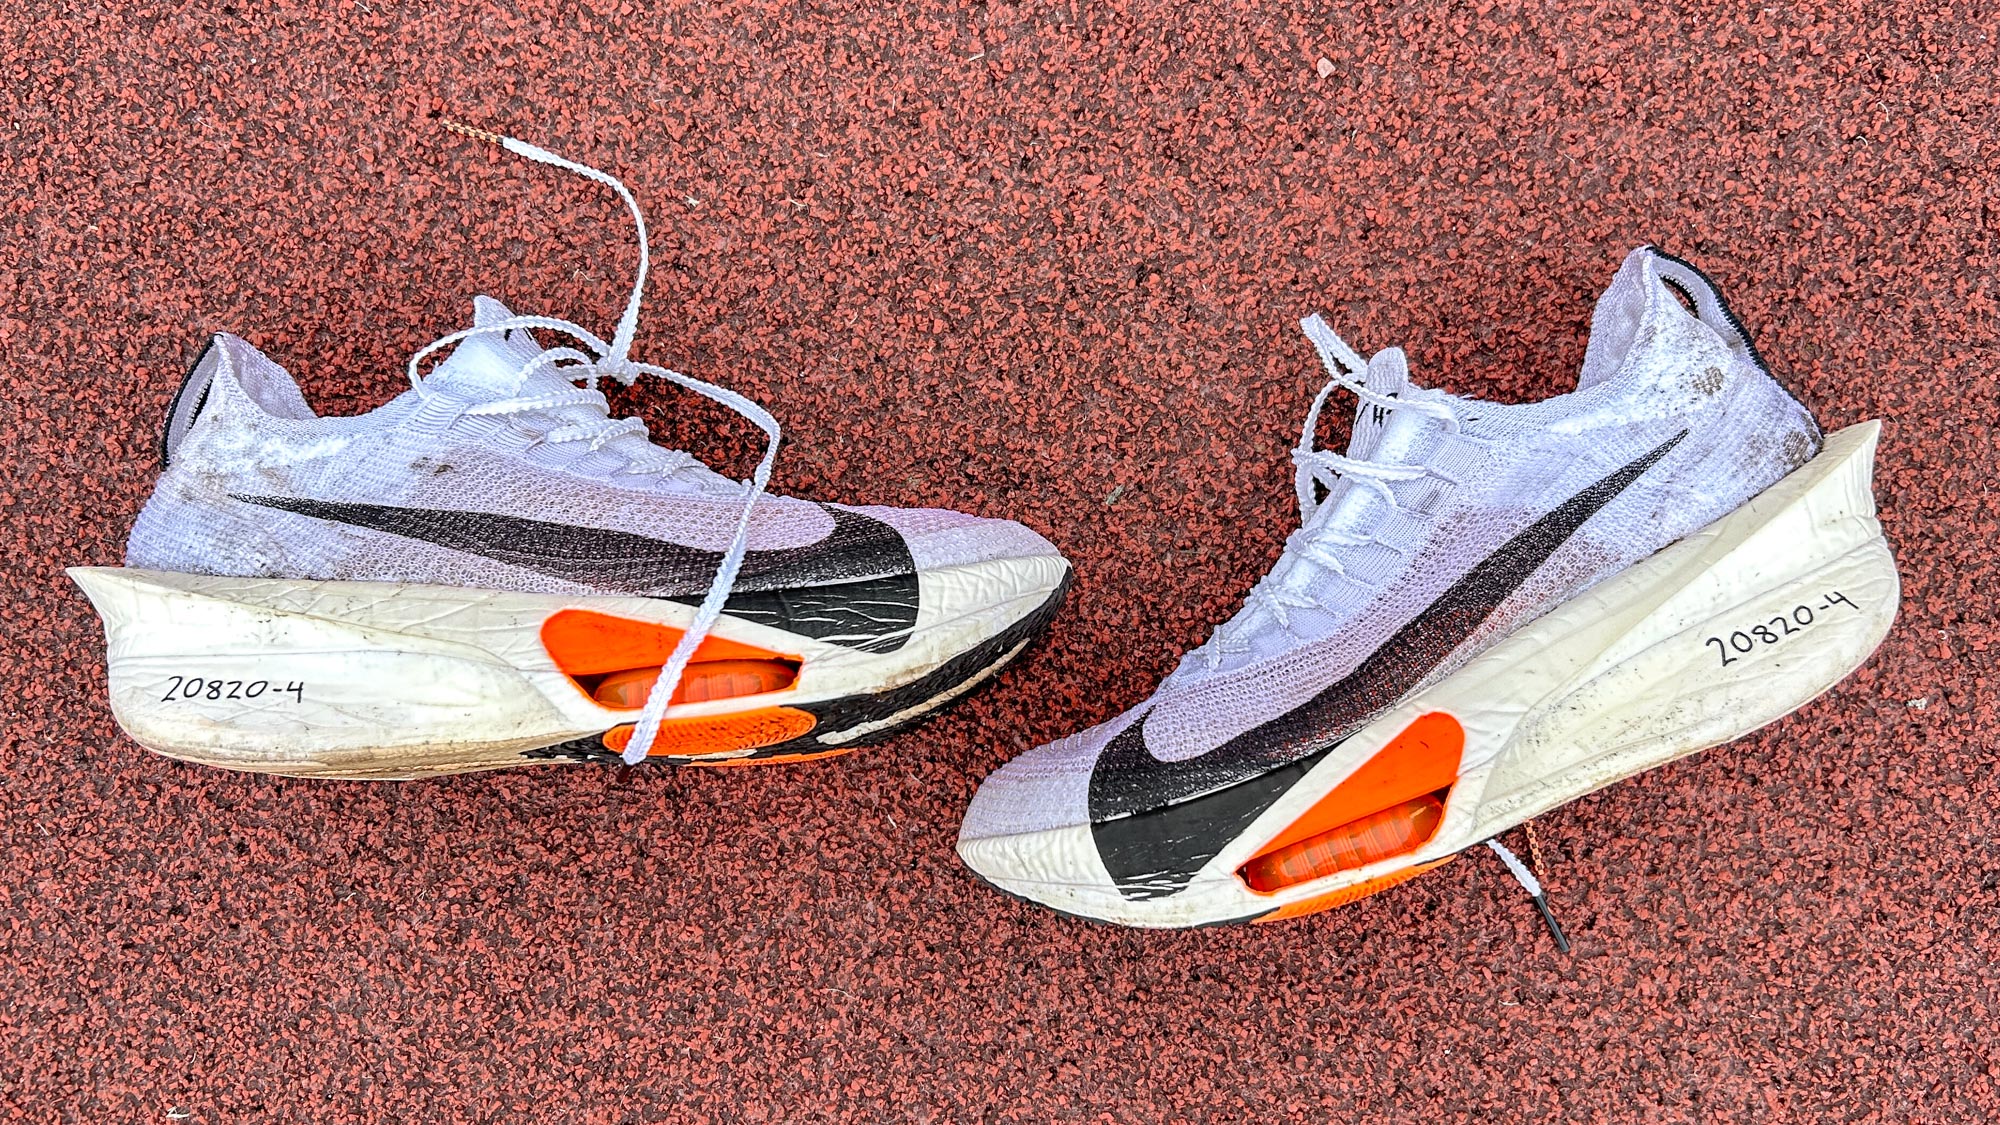 Nike Alphafly 3 running shoes on a running track